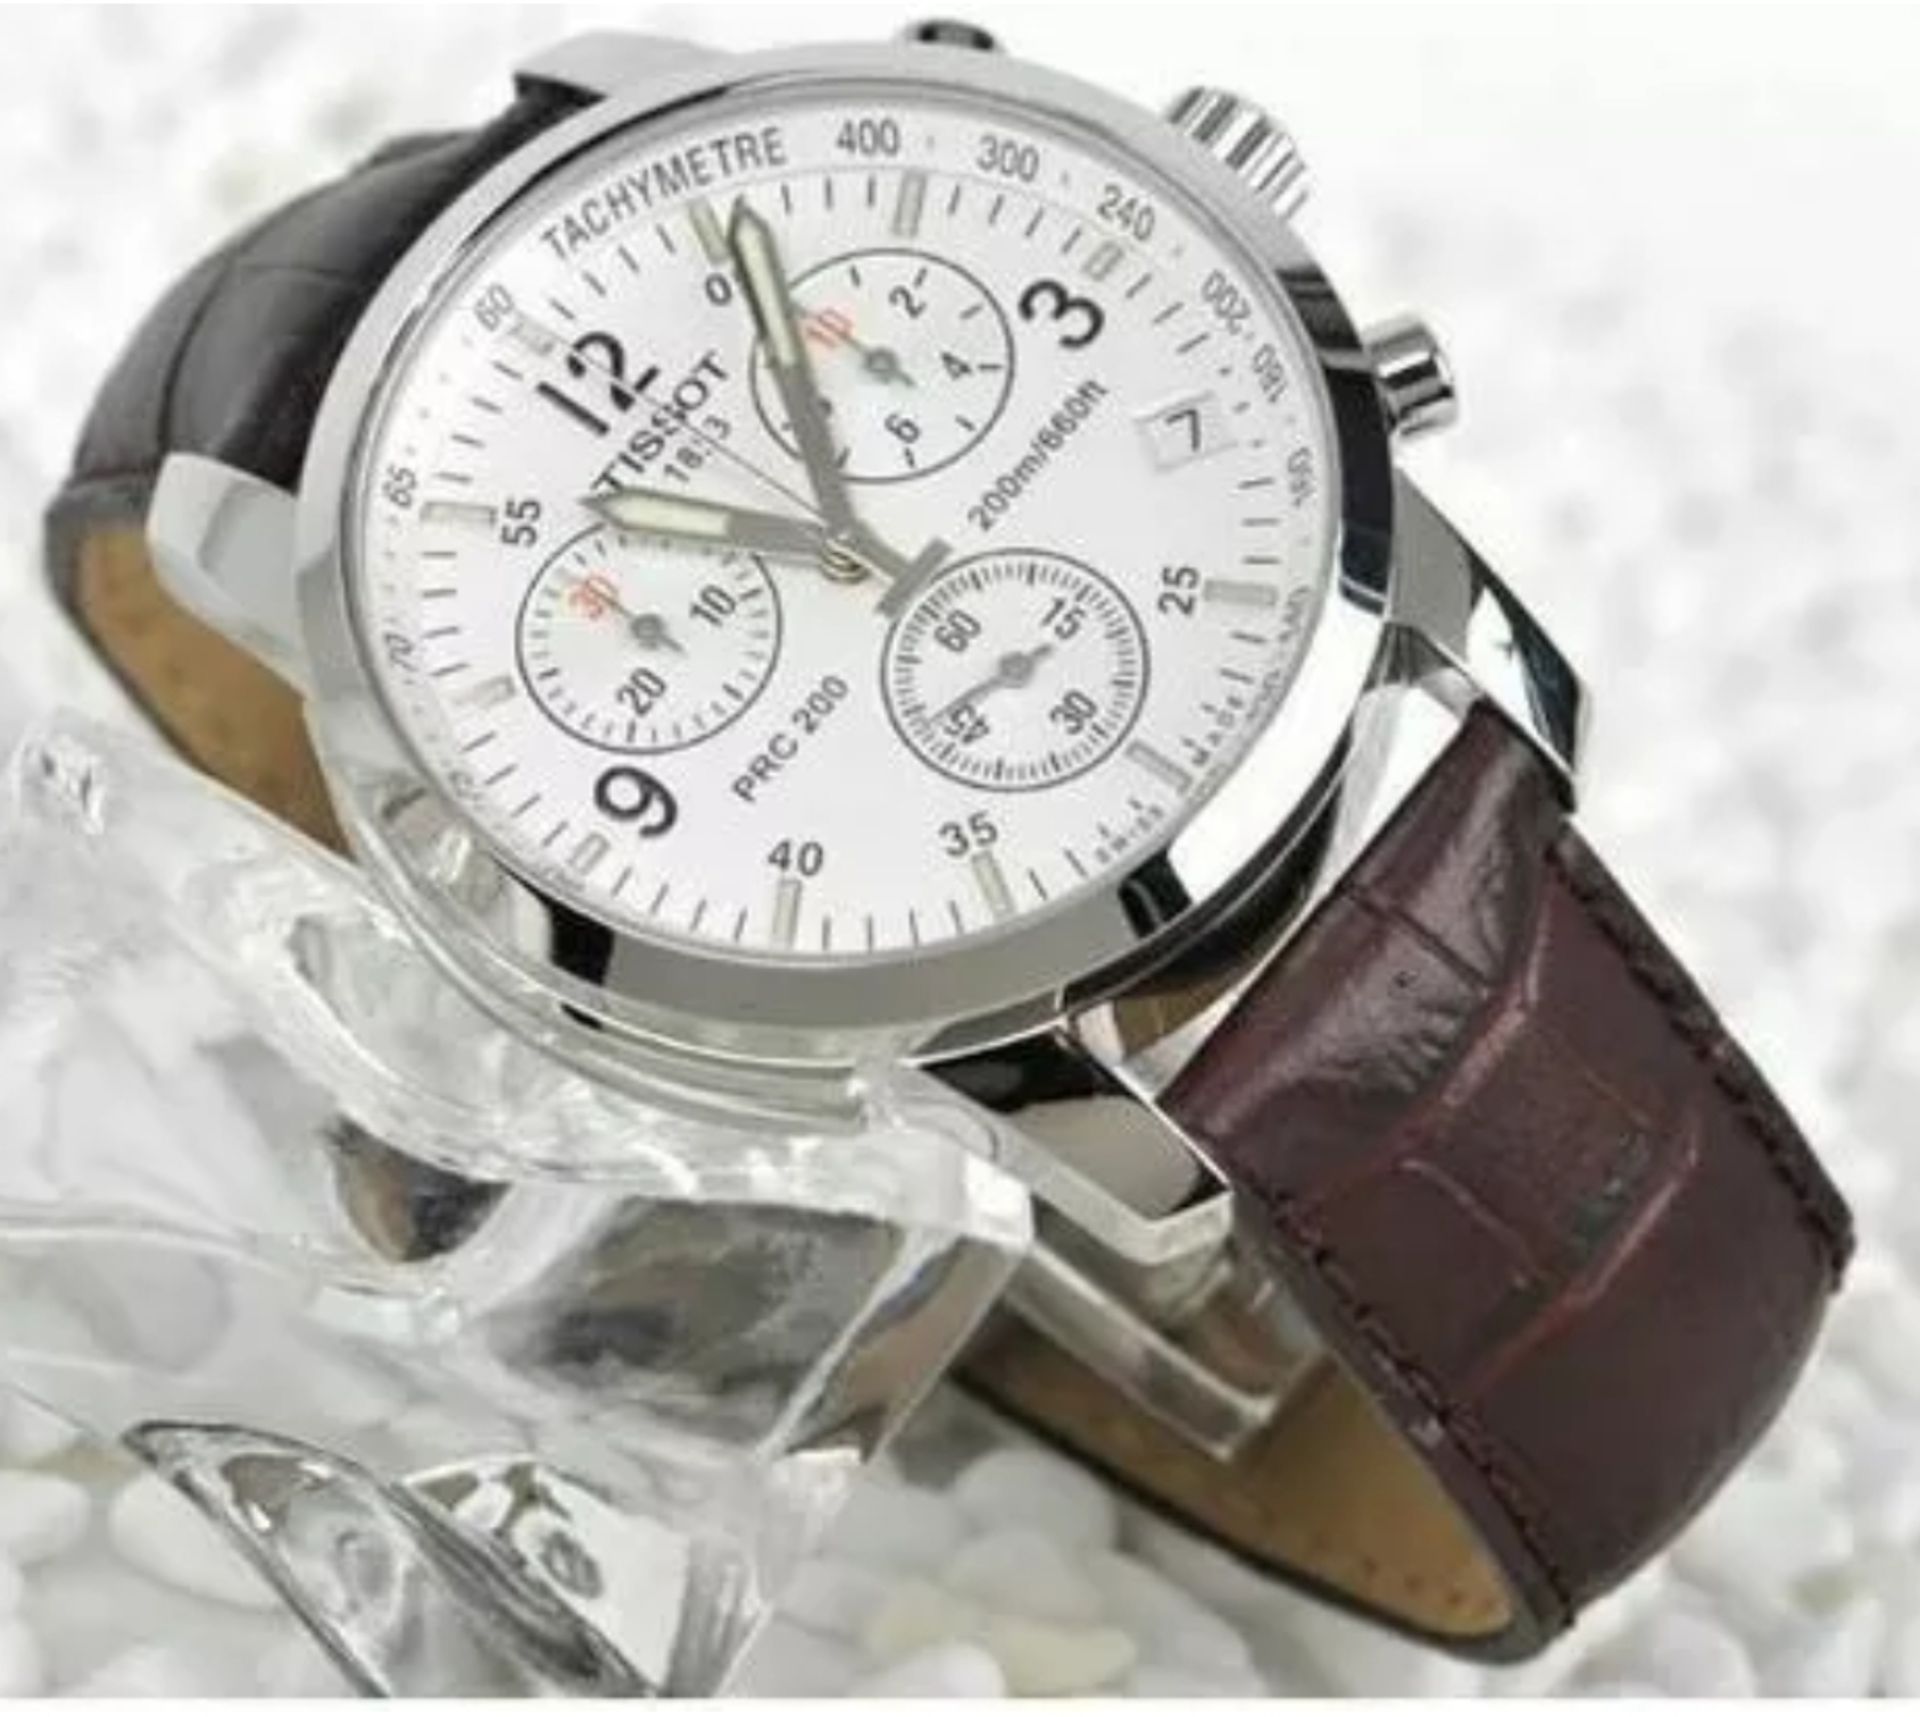 Tissot T-Sport Prc200 Chronograph Men's Brown Leather Strap Watch T17.1.516.32 - Image 3 of 10